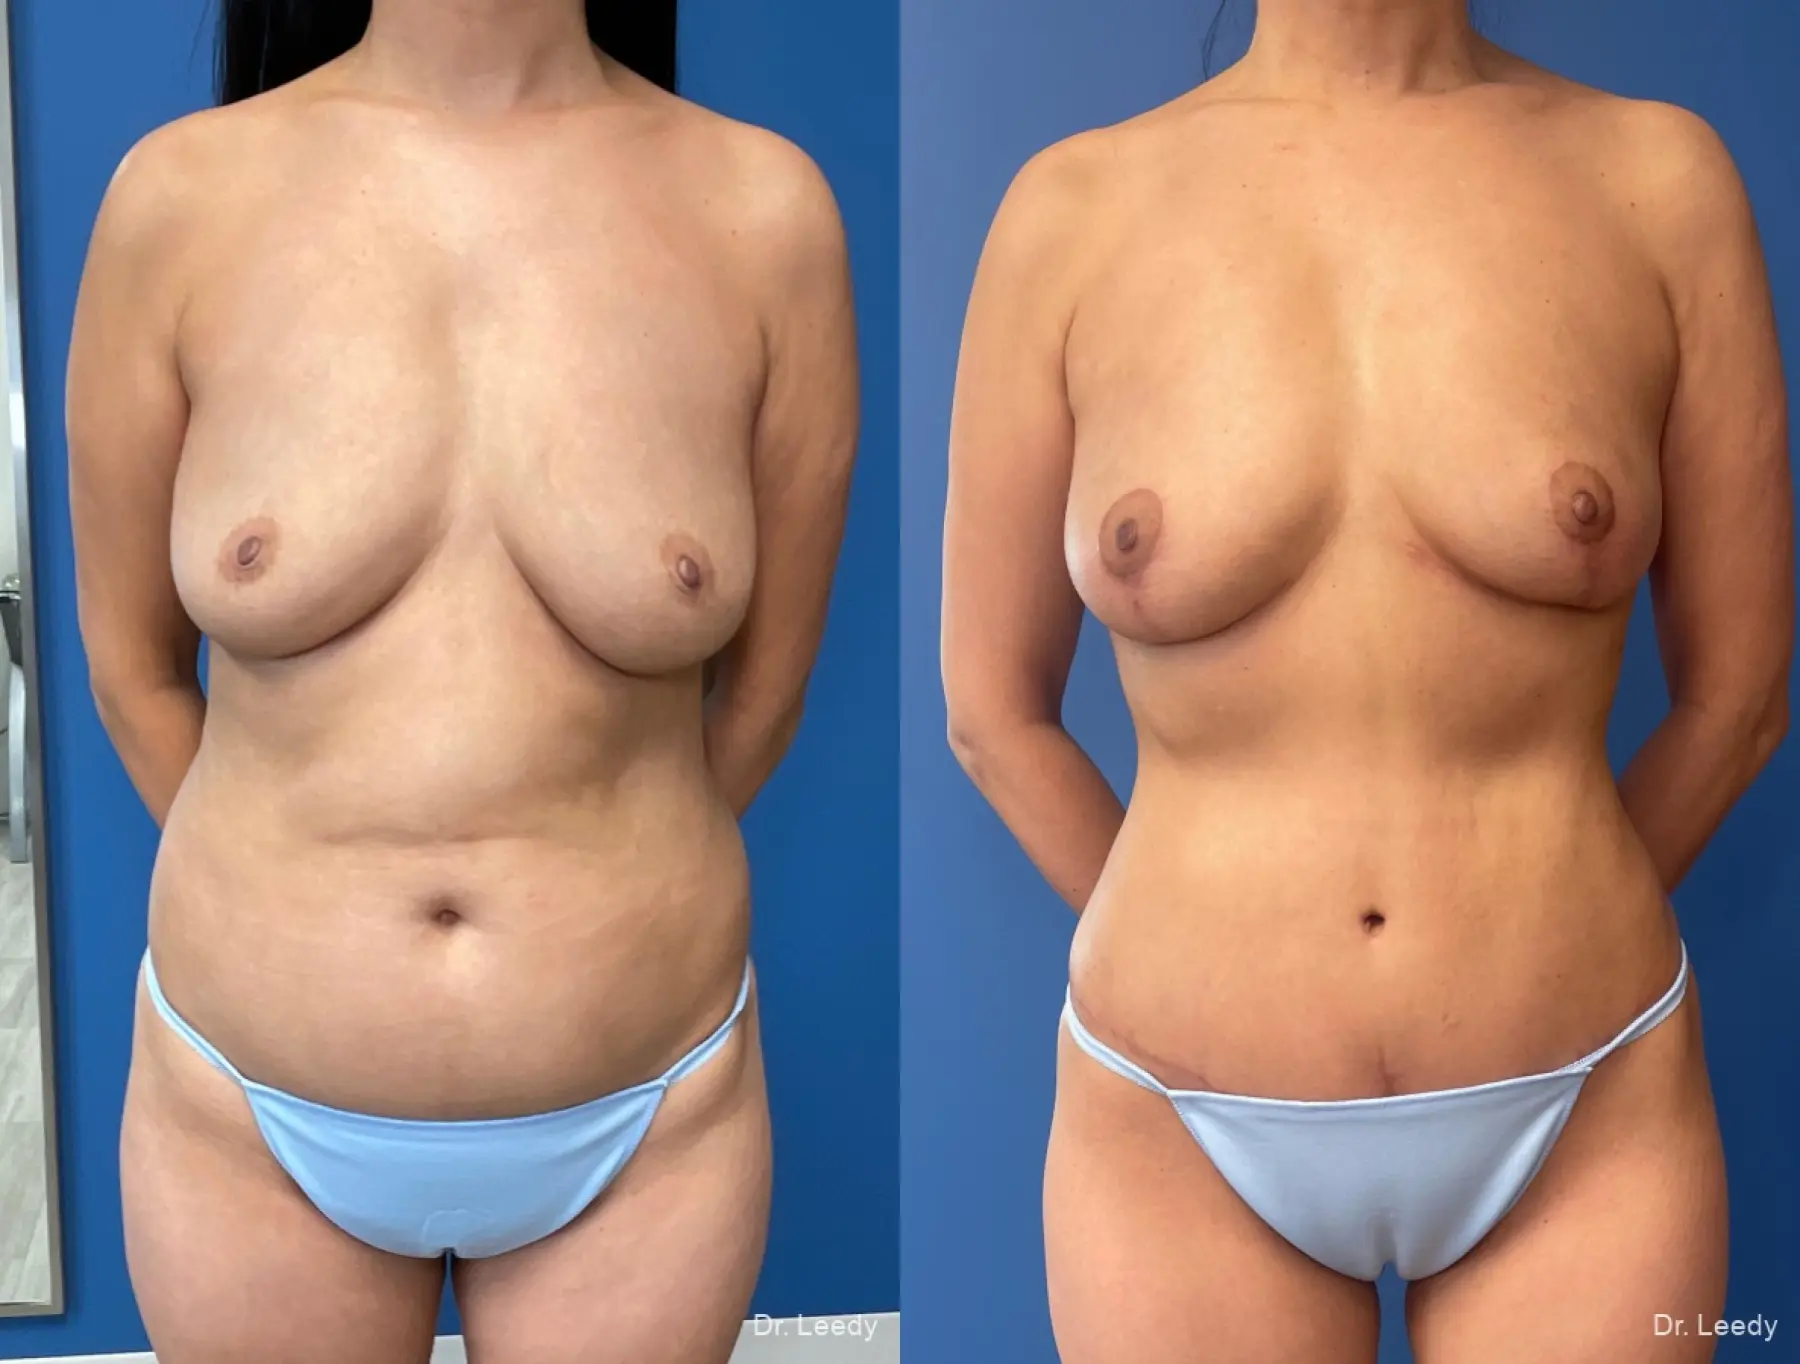 Breast Lift - Fat: Patient 2 - Before and After  